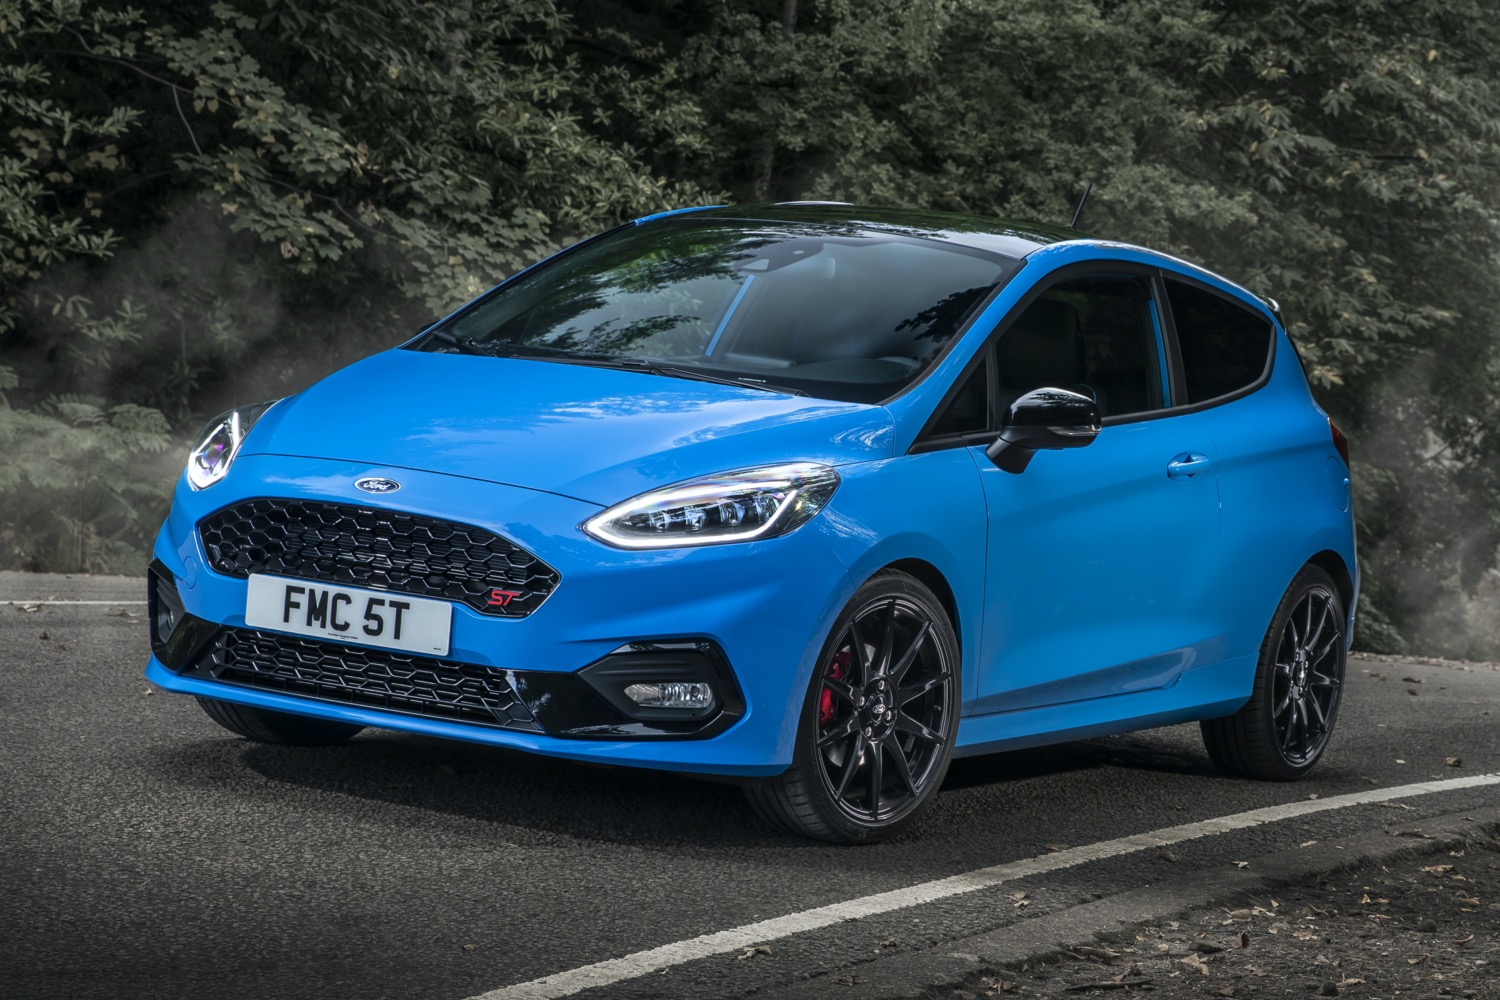 optie Plaats Een goede vriend Ford Fiesta ST Edition Revealed In Europe, Limited To 500 Total Units